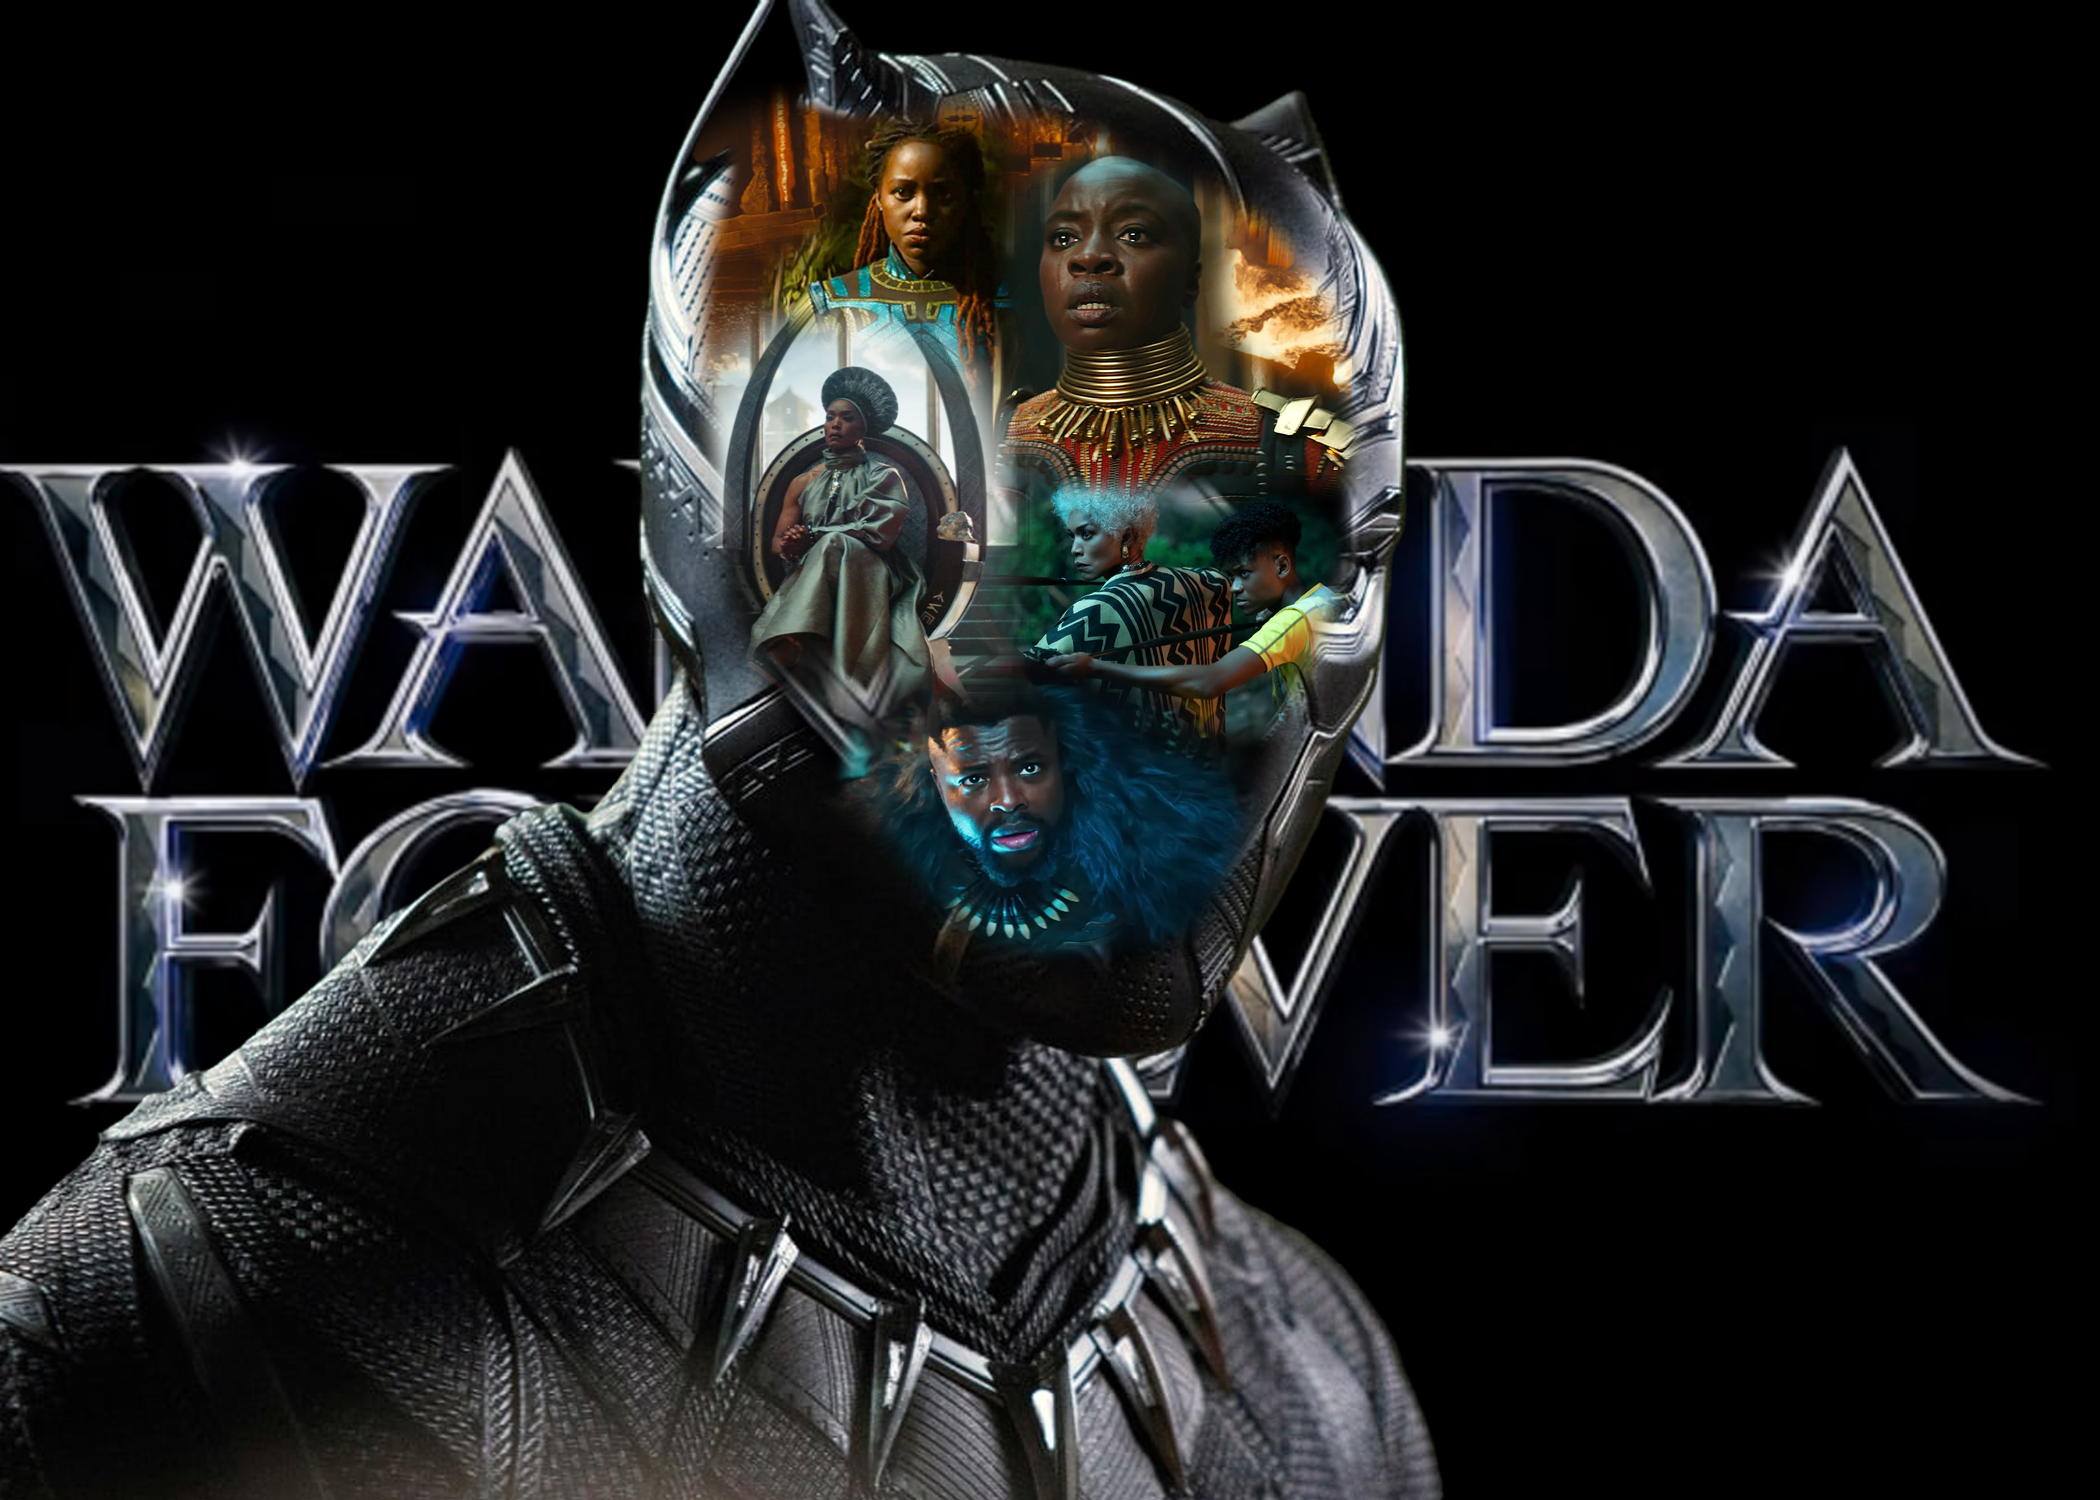 Black Panther 2 release date, cast and more about Wakanda Forever